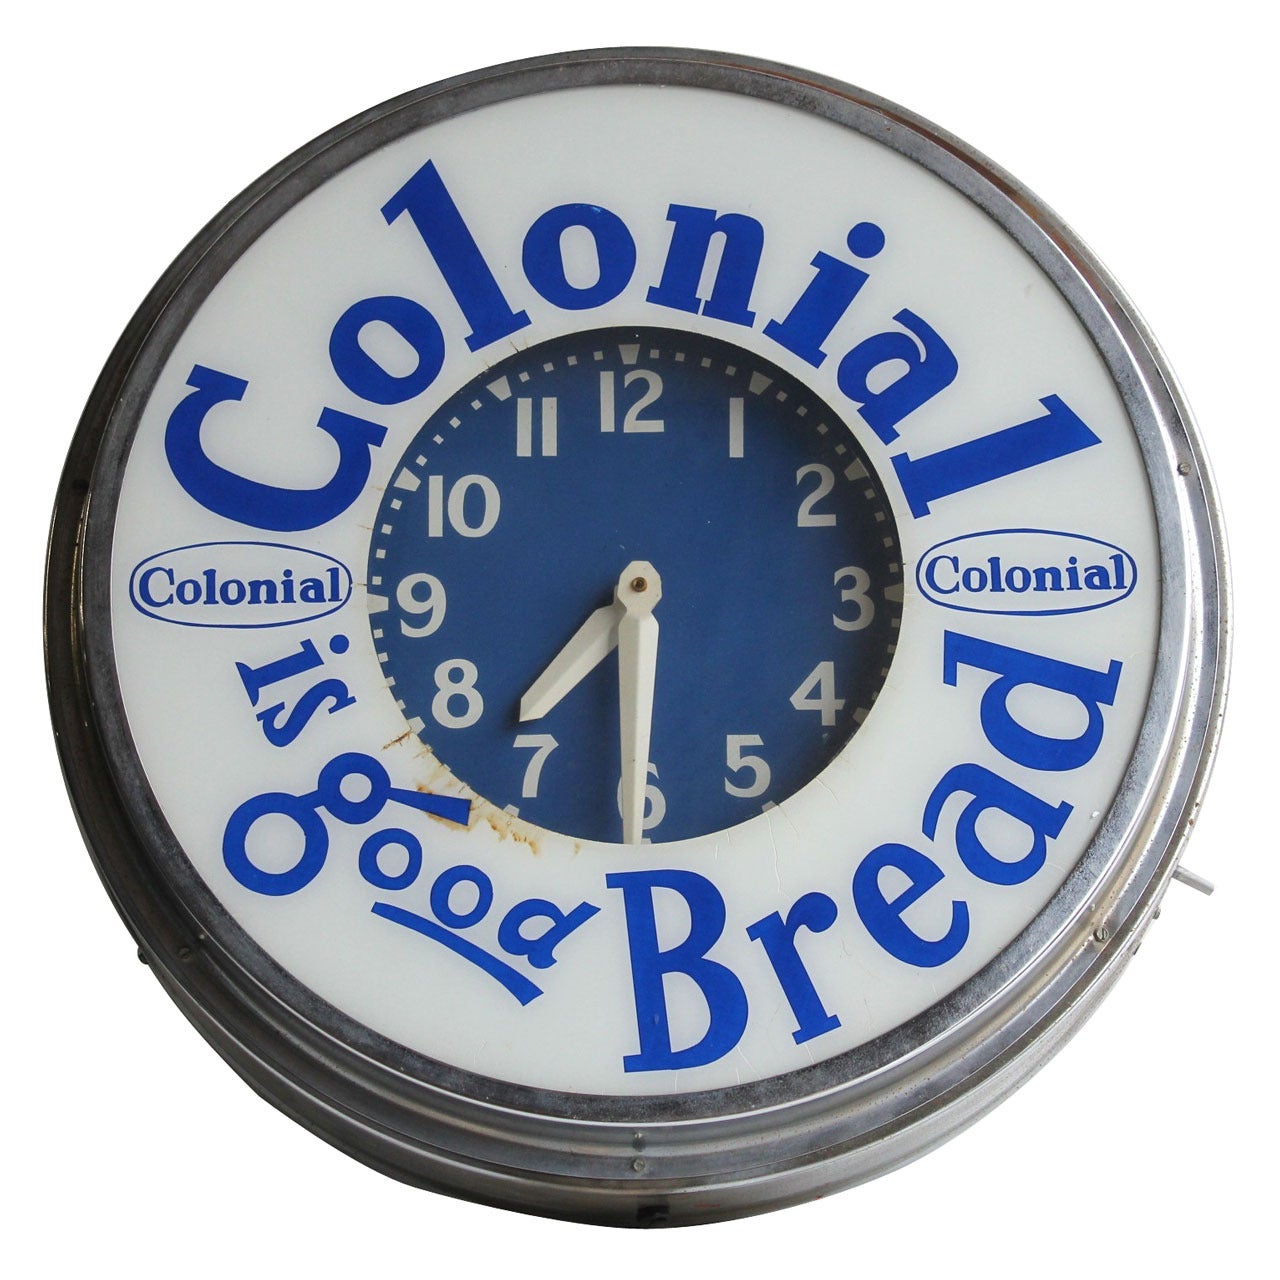 Large 1950's Neon Advertising Clock For Colonial Bread